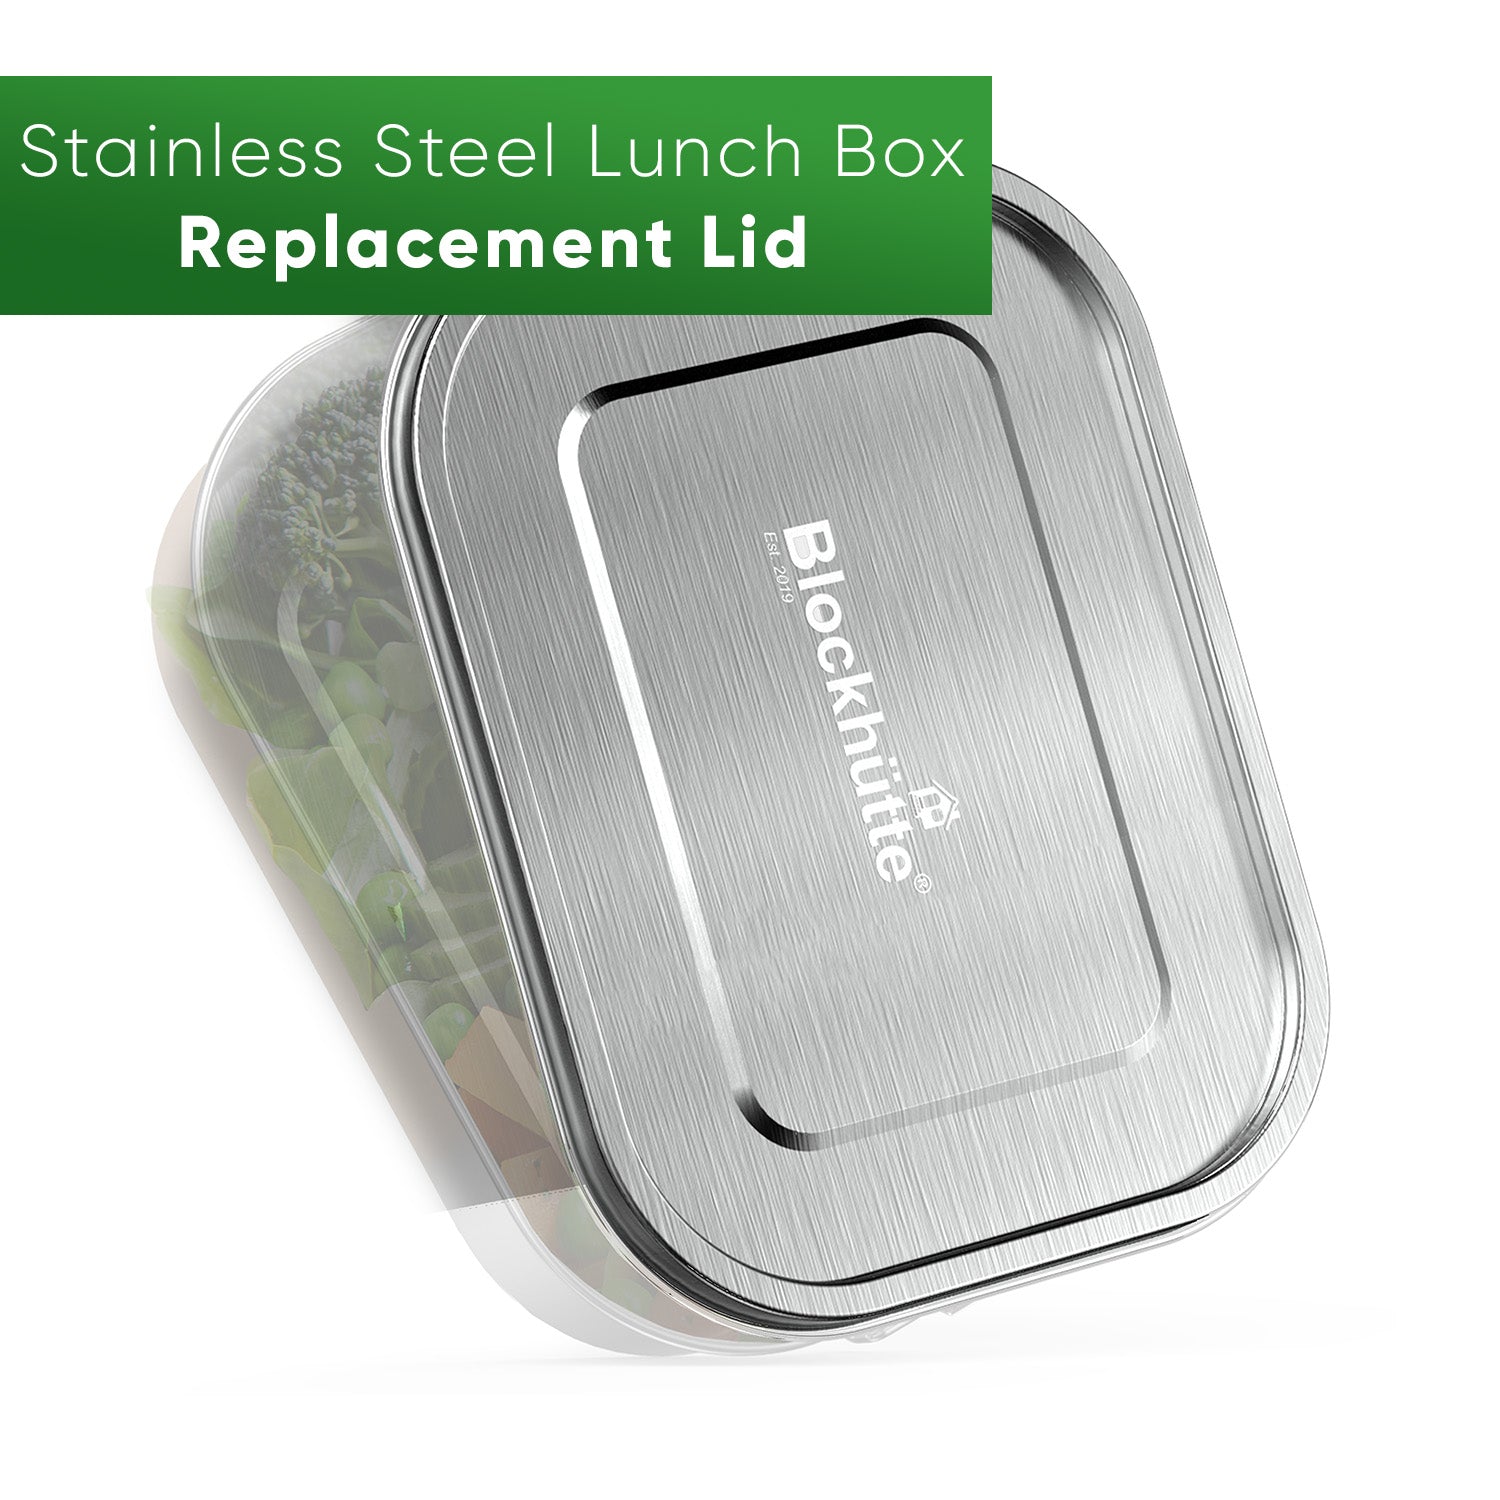 Stainless Steel Lunch Box - Replacement Lid